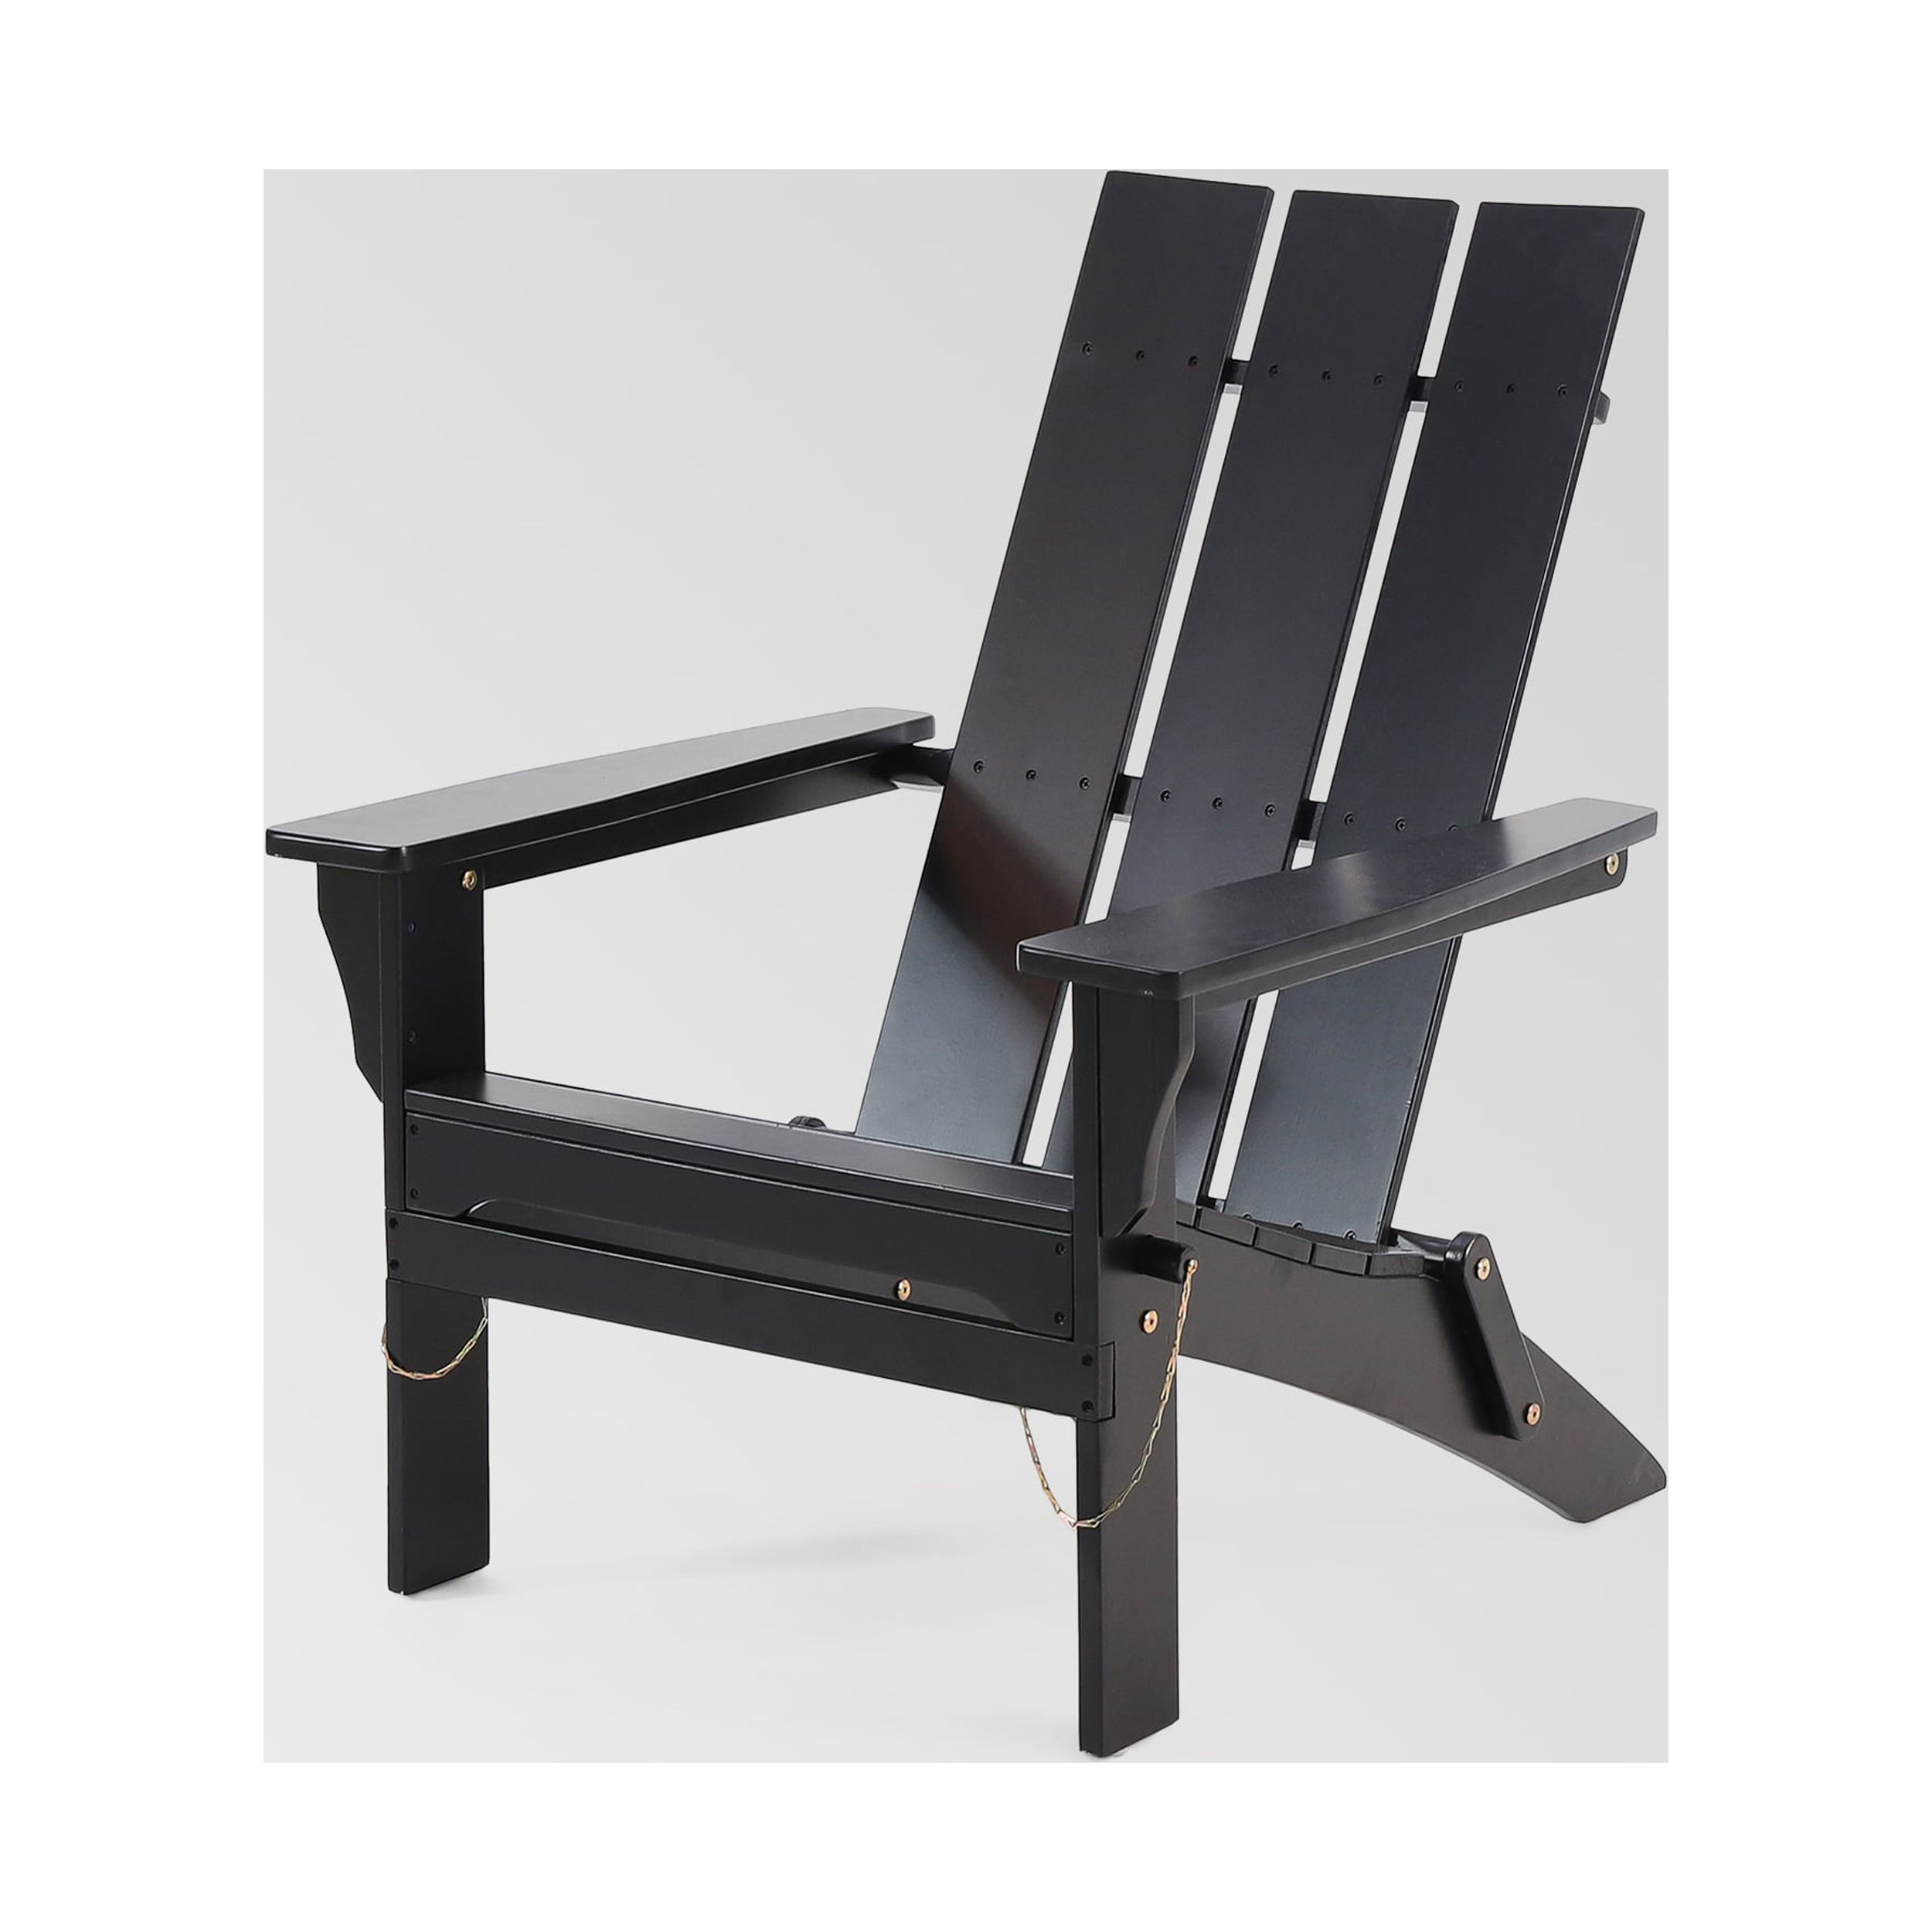 KUIKUI Outdoor Classic Pure Black Solid Wood Chair Garden Lounge Chair Foldable - image 4 of 7